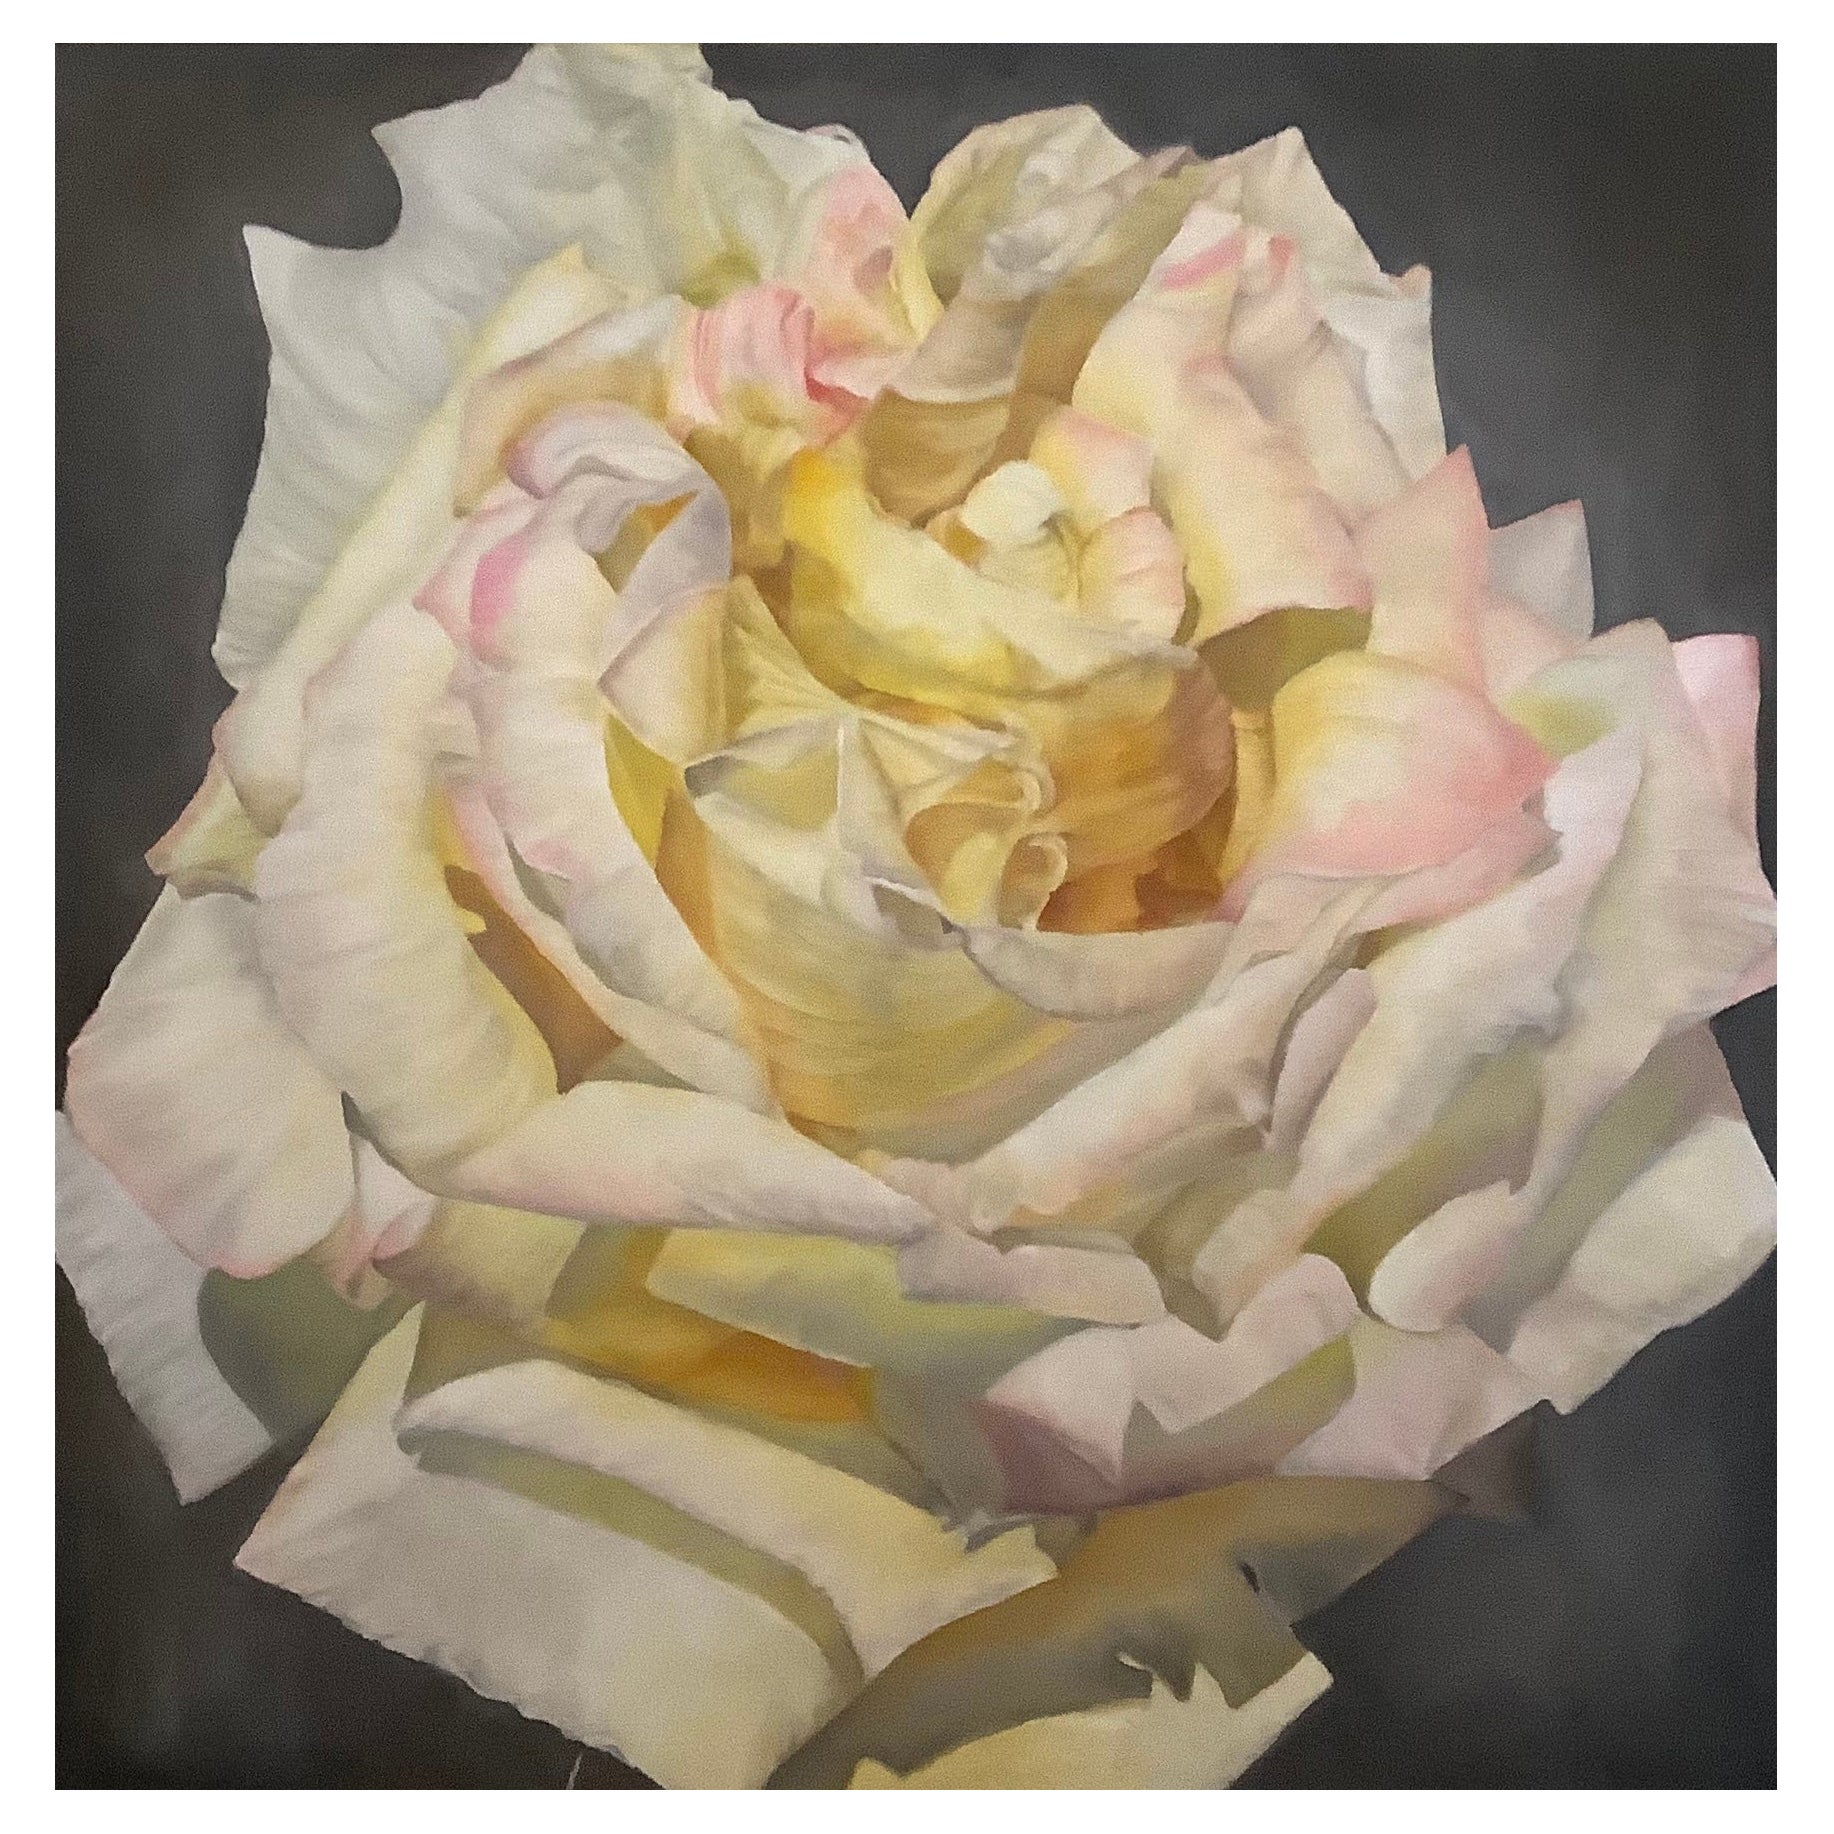 Framed Oil on Canvas "Blanca" - White Rose by Shelly Gurton